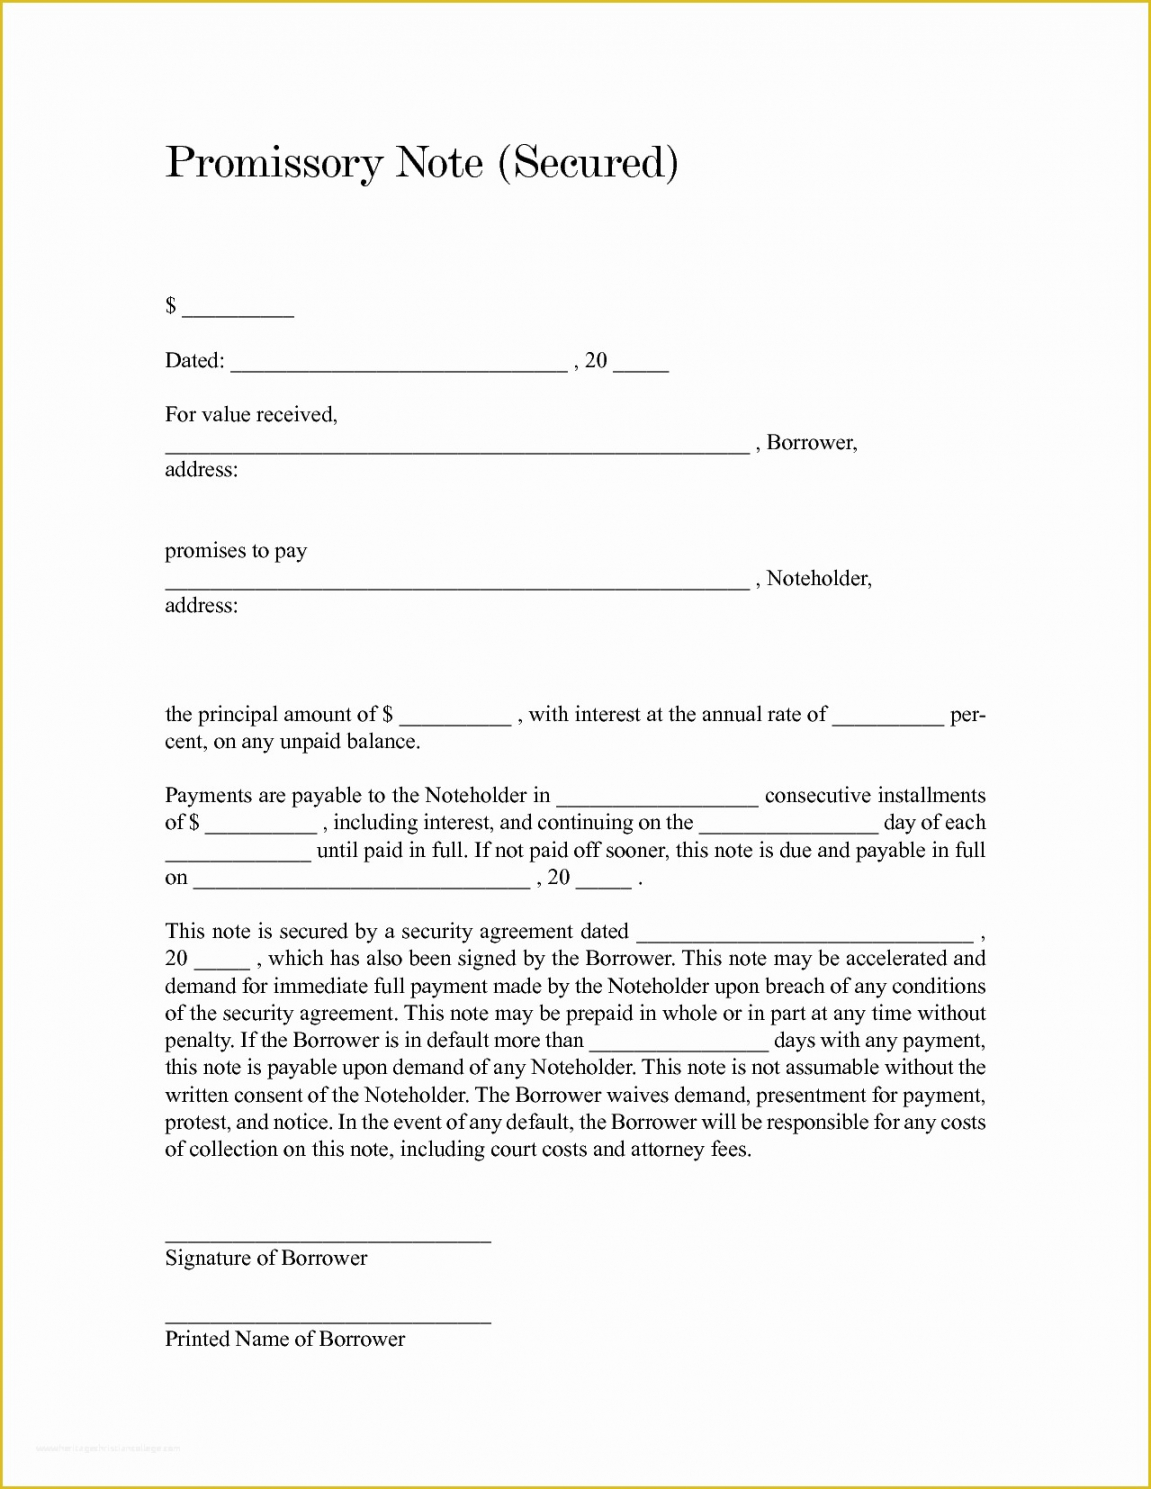 free free promissory note template for a vehicle of 4 secured promissory note template with collateral word